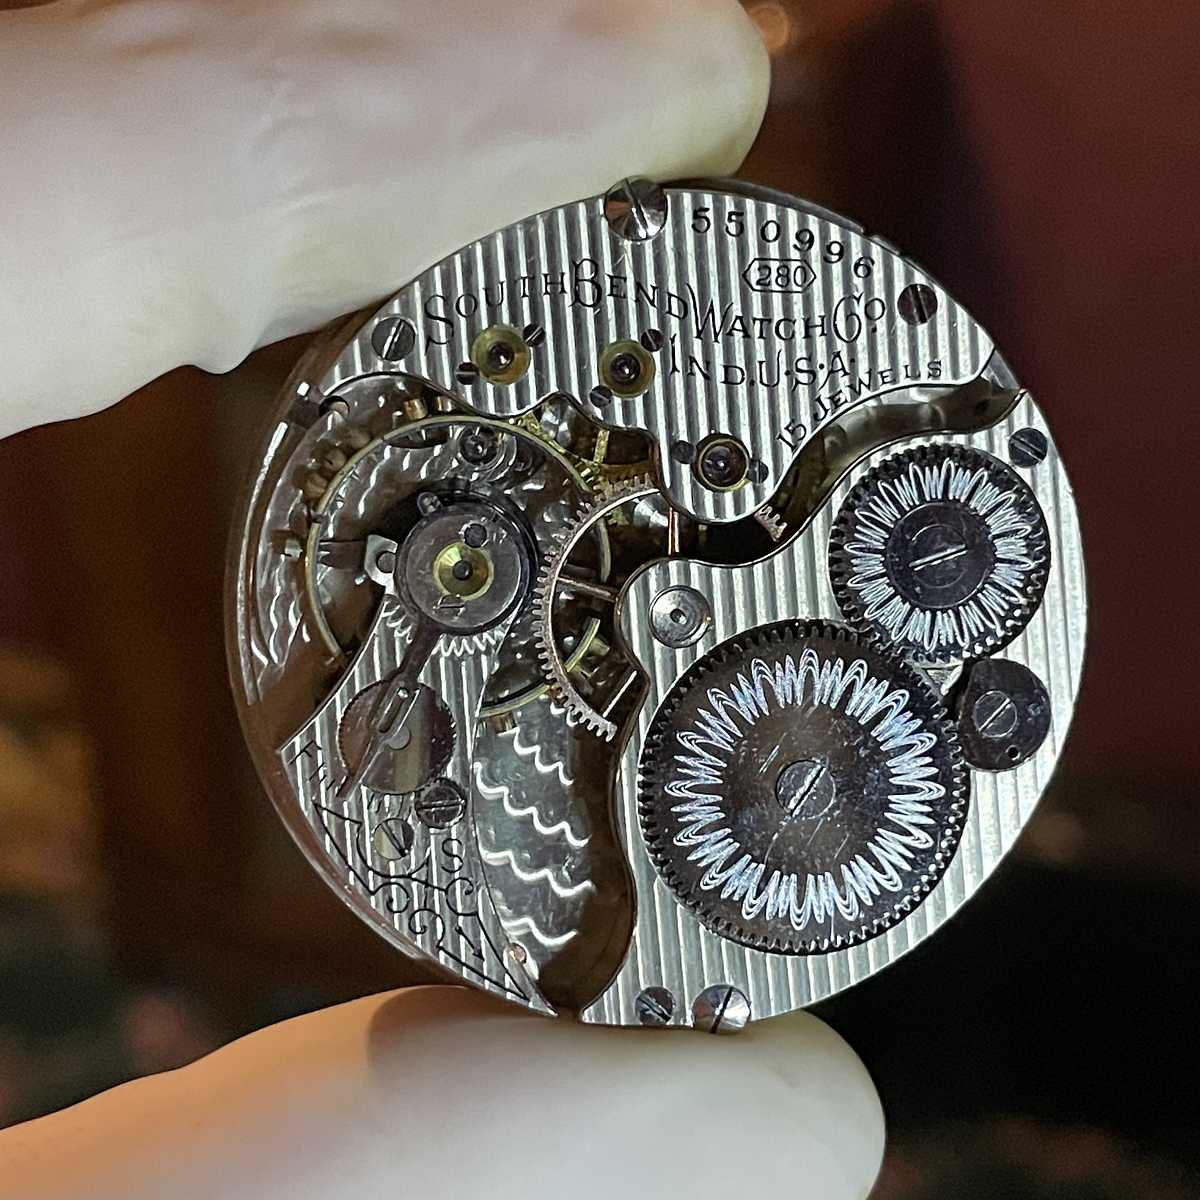 1909 South Bend Watch Grade 280 Movement with vertical damaskeening